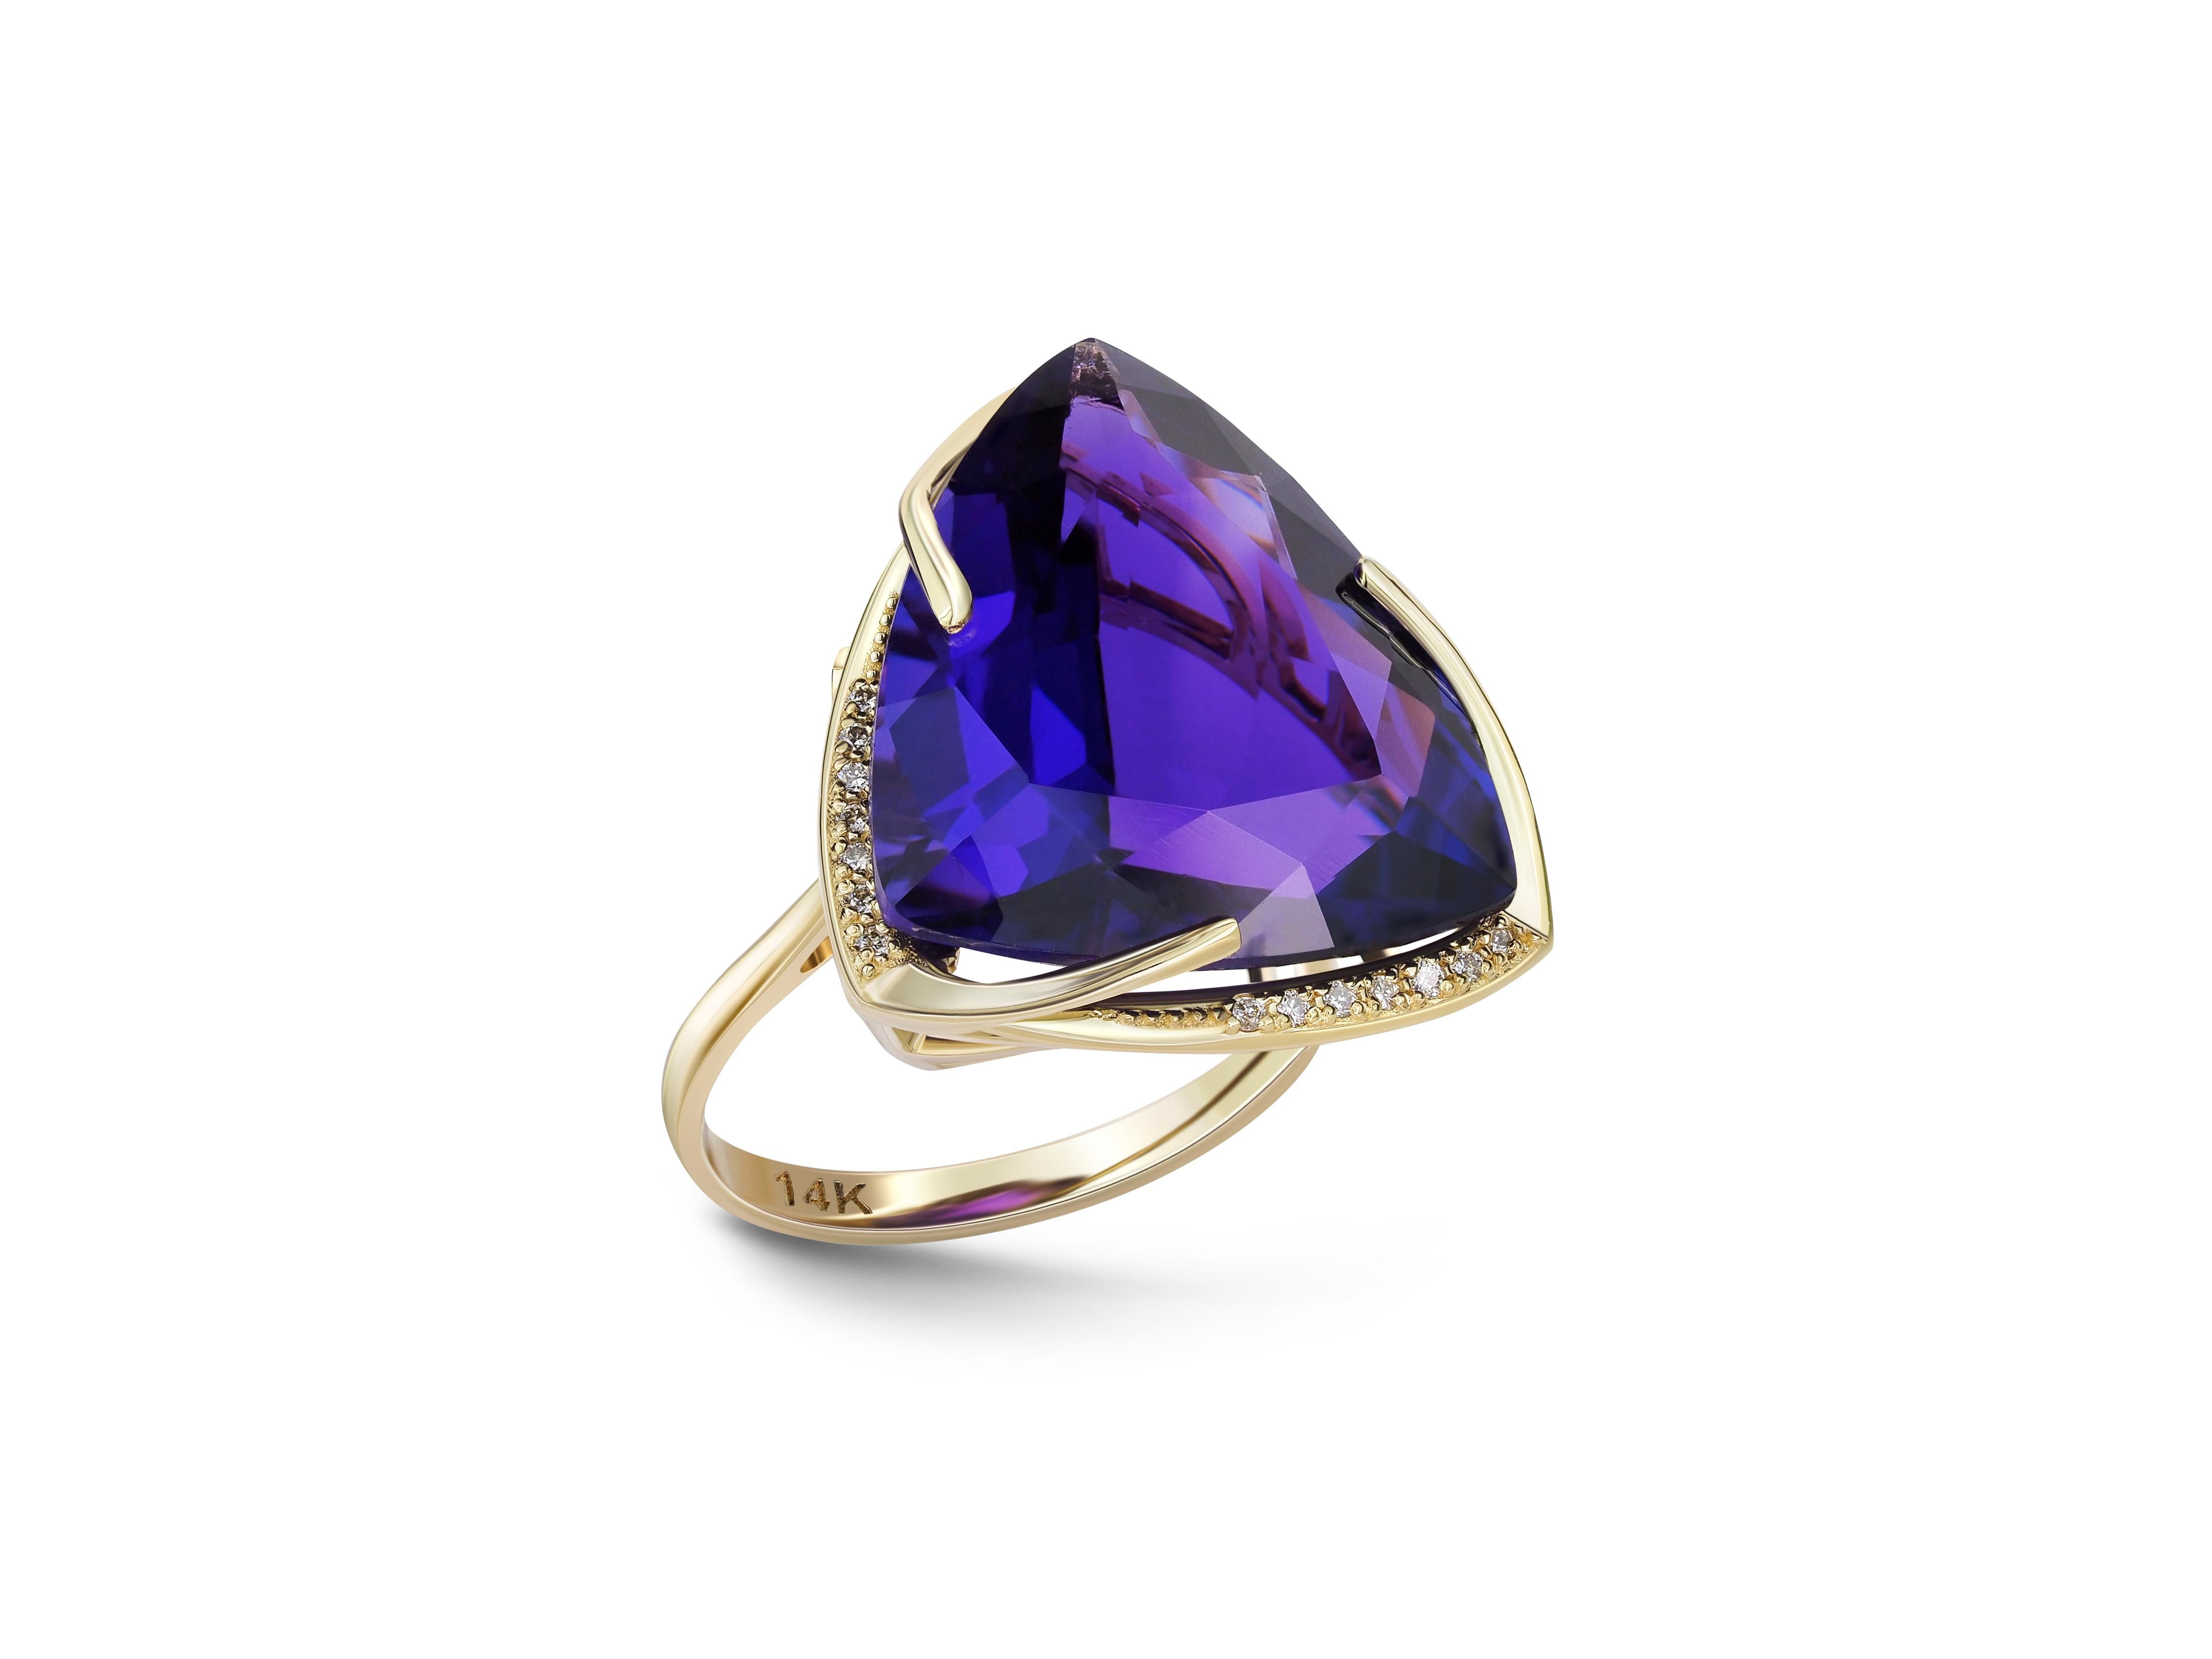 14 karat gold ring with genuine amethyst and diamonds. February birthstone.
Weight: 6.95 g.
Central stone: Genuine amethyst
Weight: 19.00 ct (19 x 19 x 17 mm)
Trillone cut, color - intence violet
Clarity: Transparent with inclusions
Surrounding